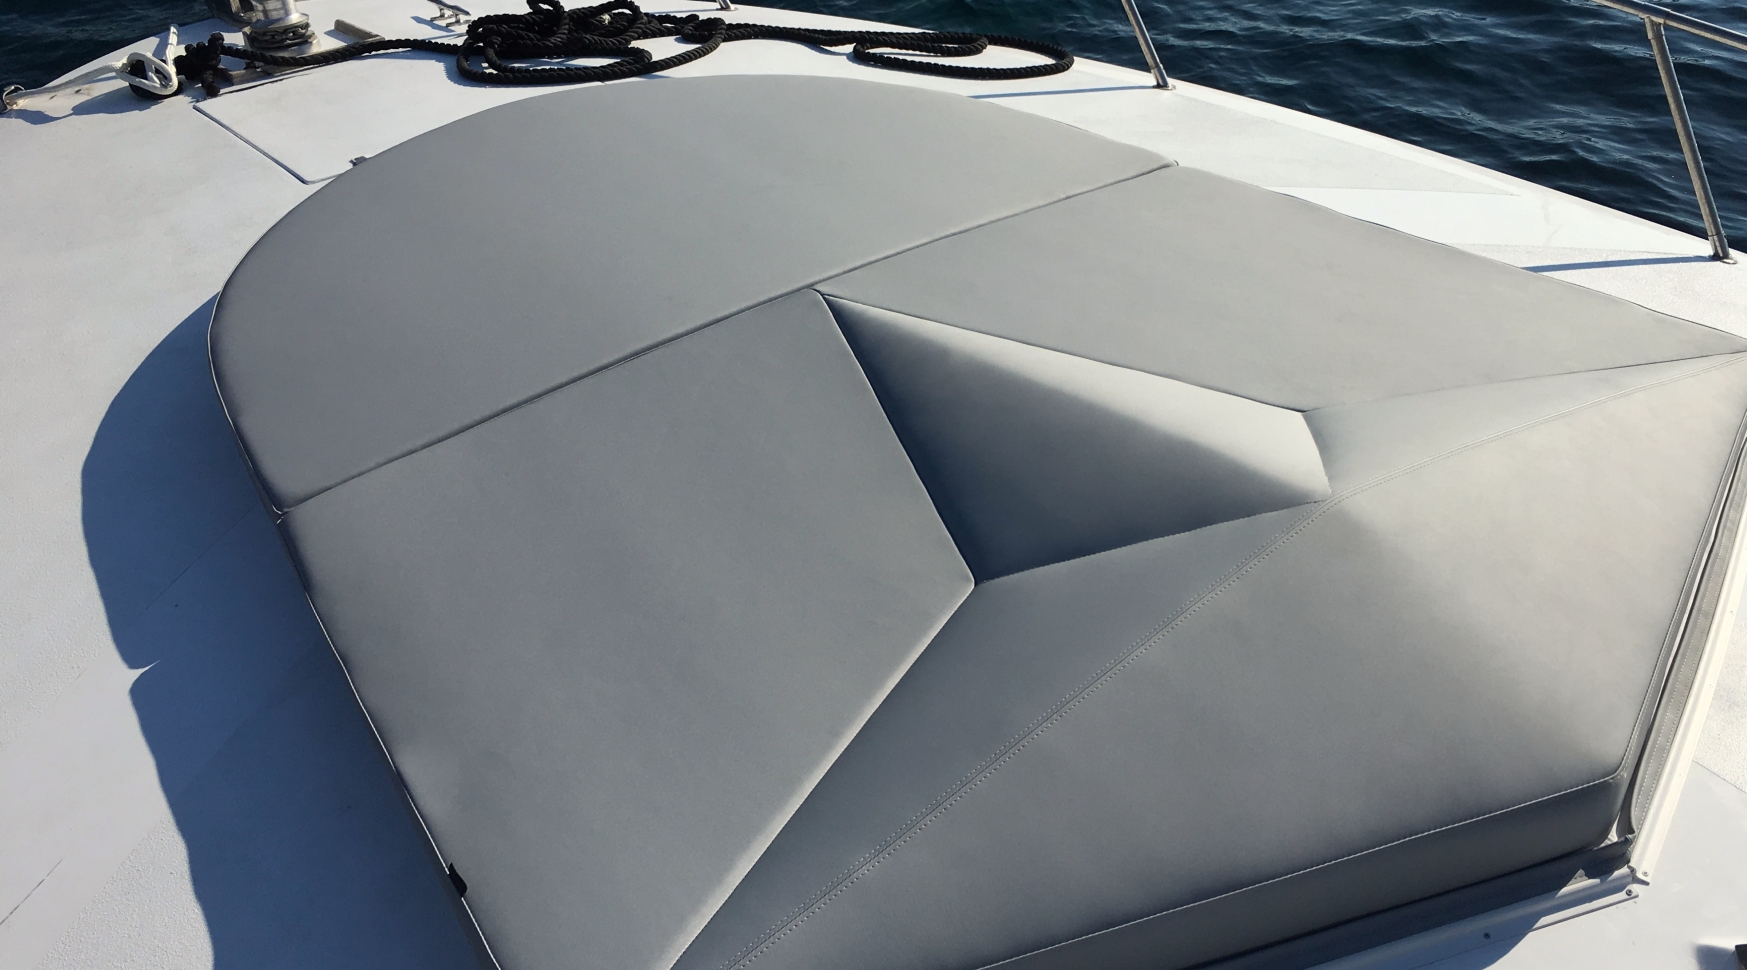 Innovative 'compass rose' design for yacht sunbed cushion. Offering maximum comfort, dryness and protection on your yacht.